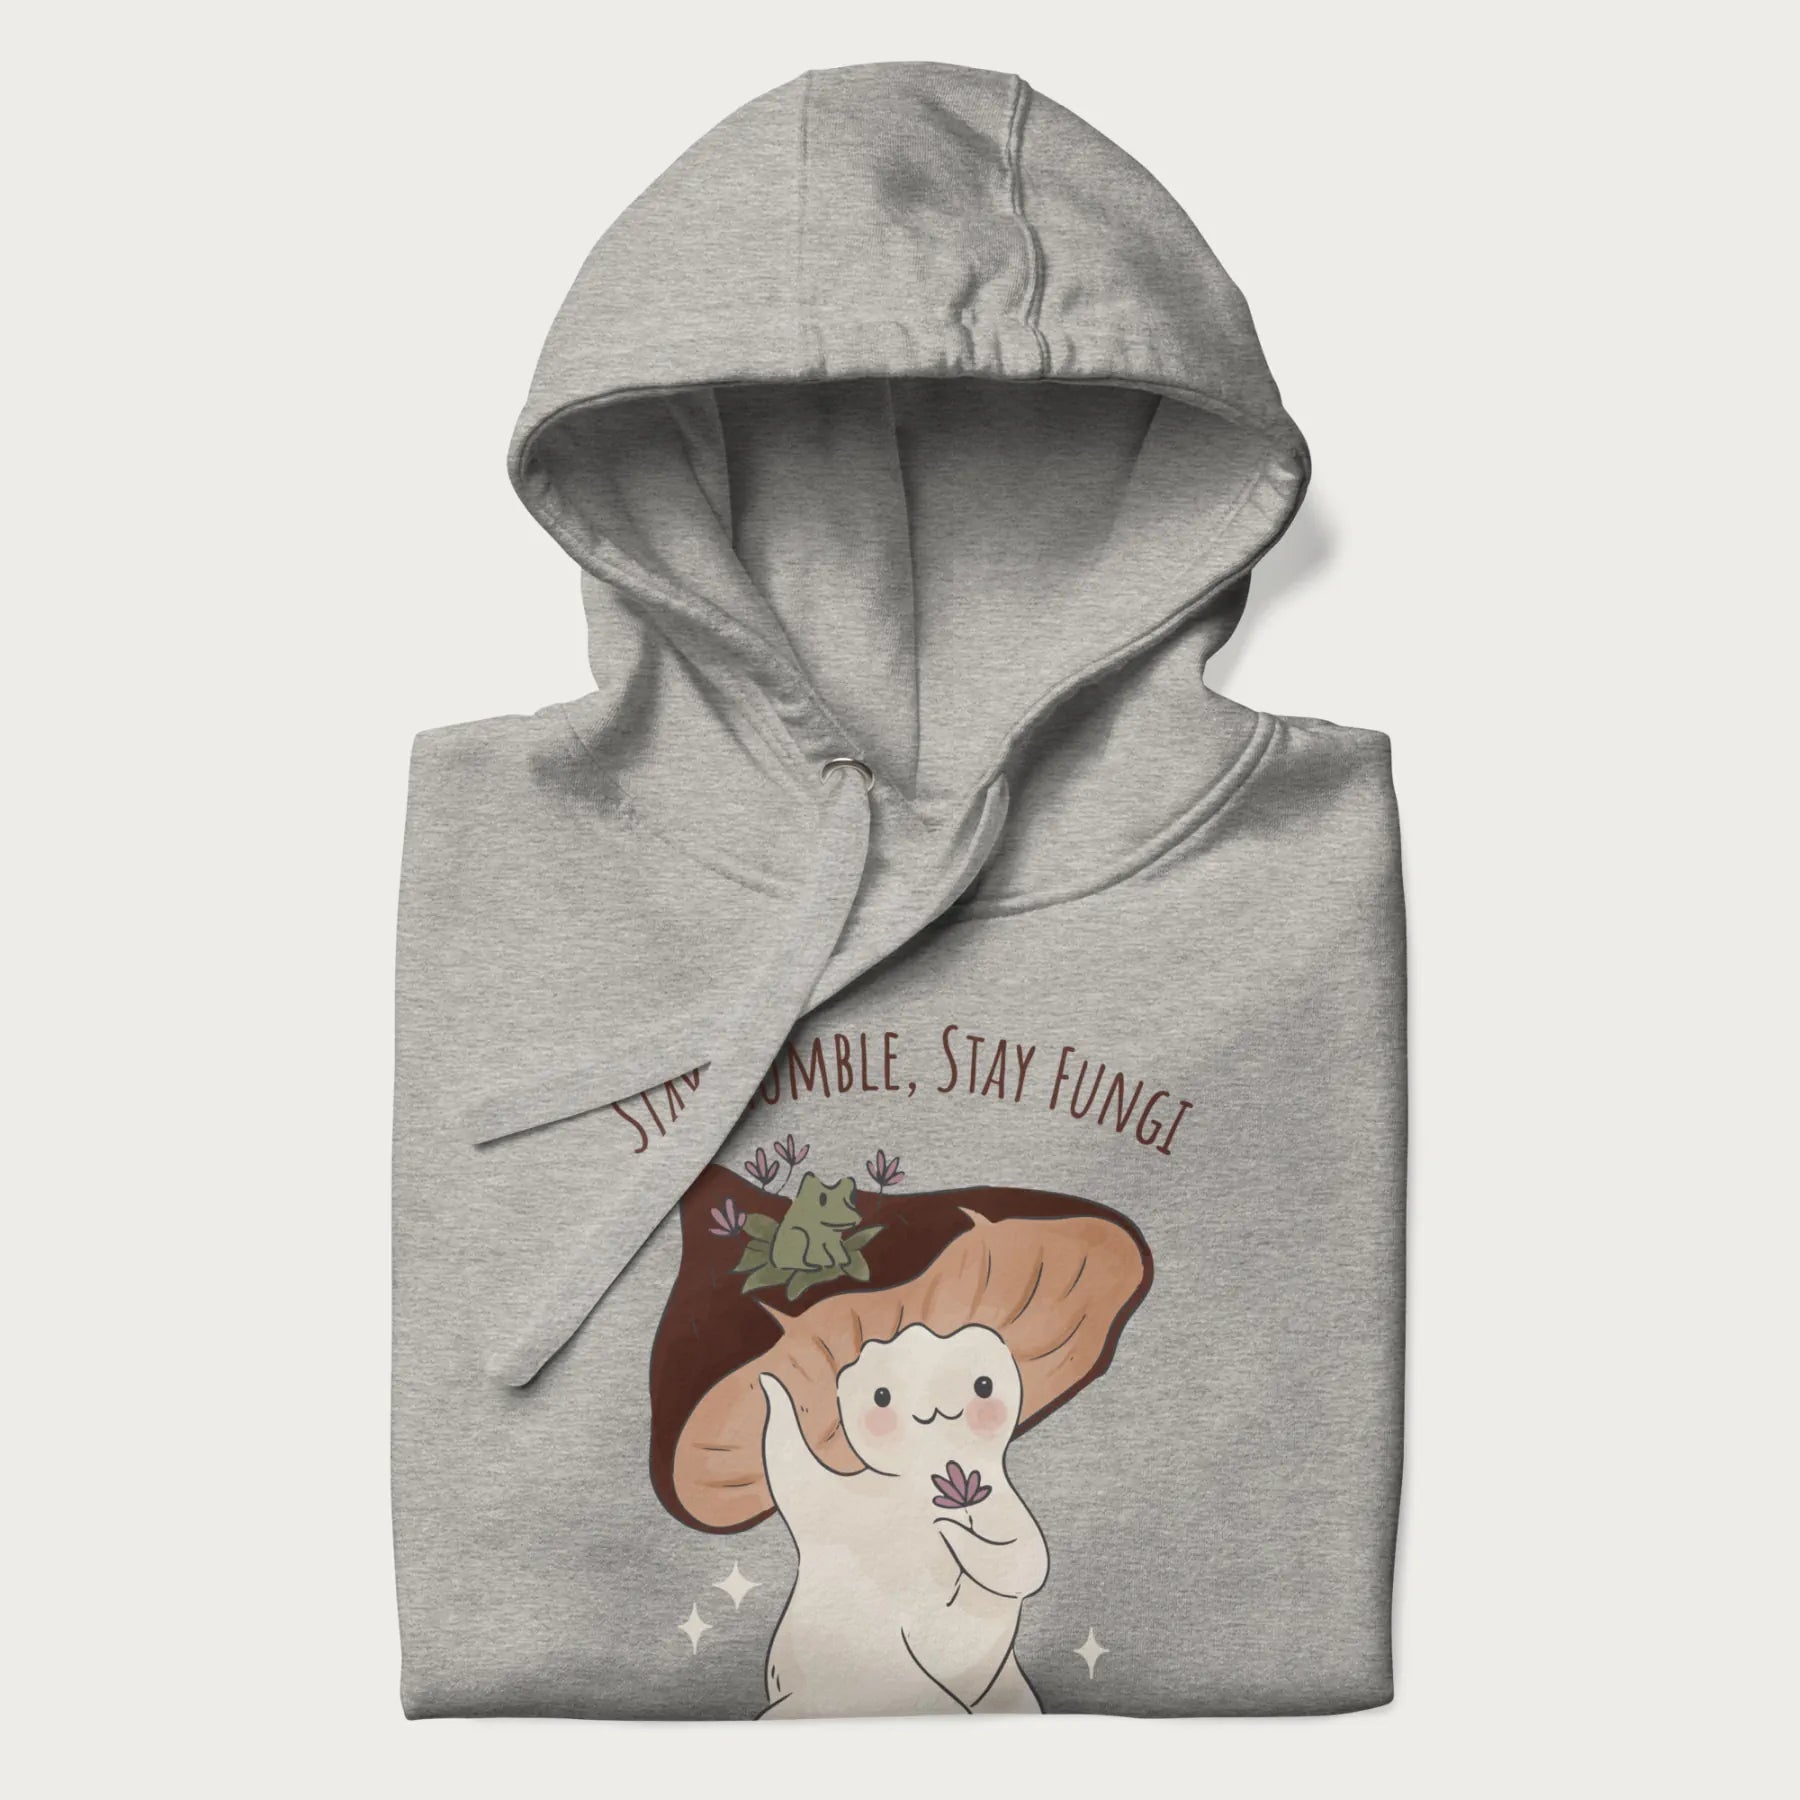 Folded light grey hoodie with graphic of a cute mushroom character holding a flower with a frog on its cap and the text 'Stay Humble, Stay Fungi' above.